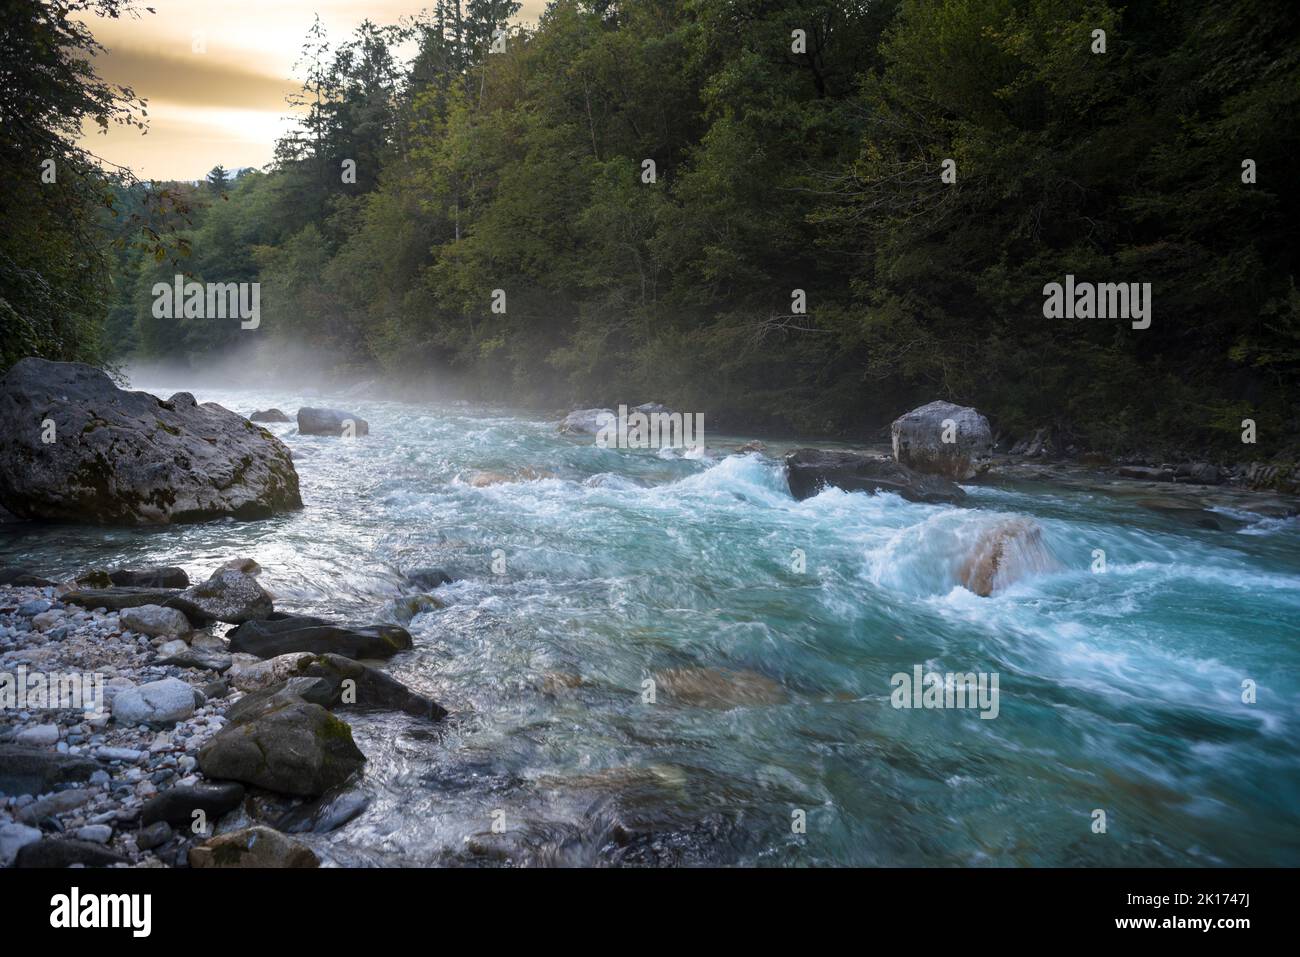 Rough river in alpine forest Stock Photo